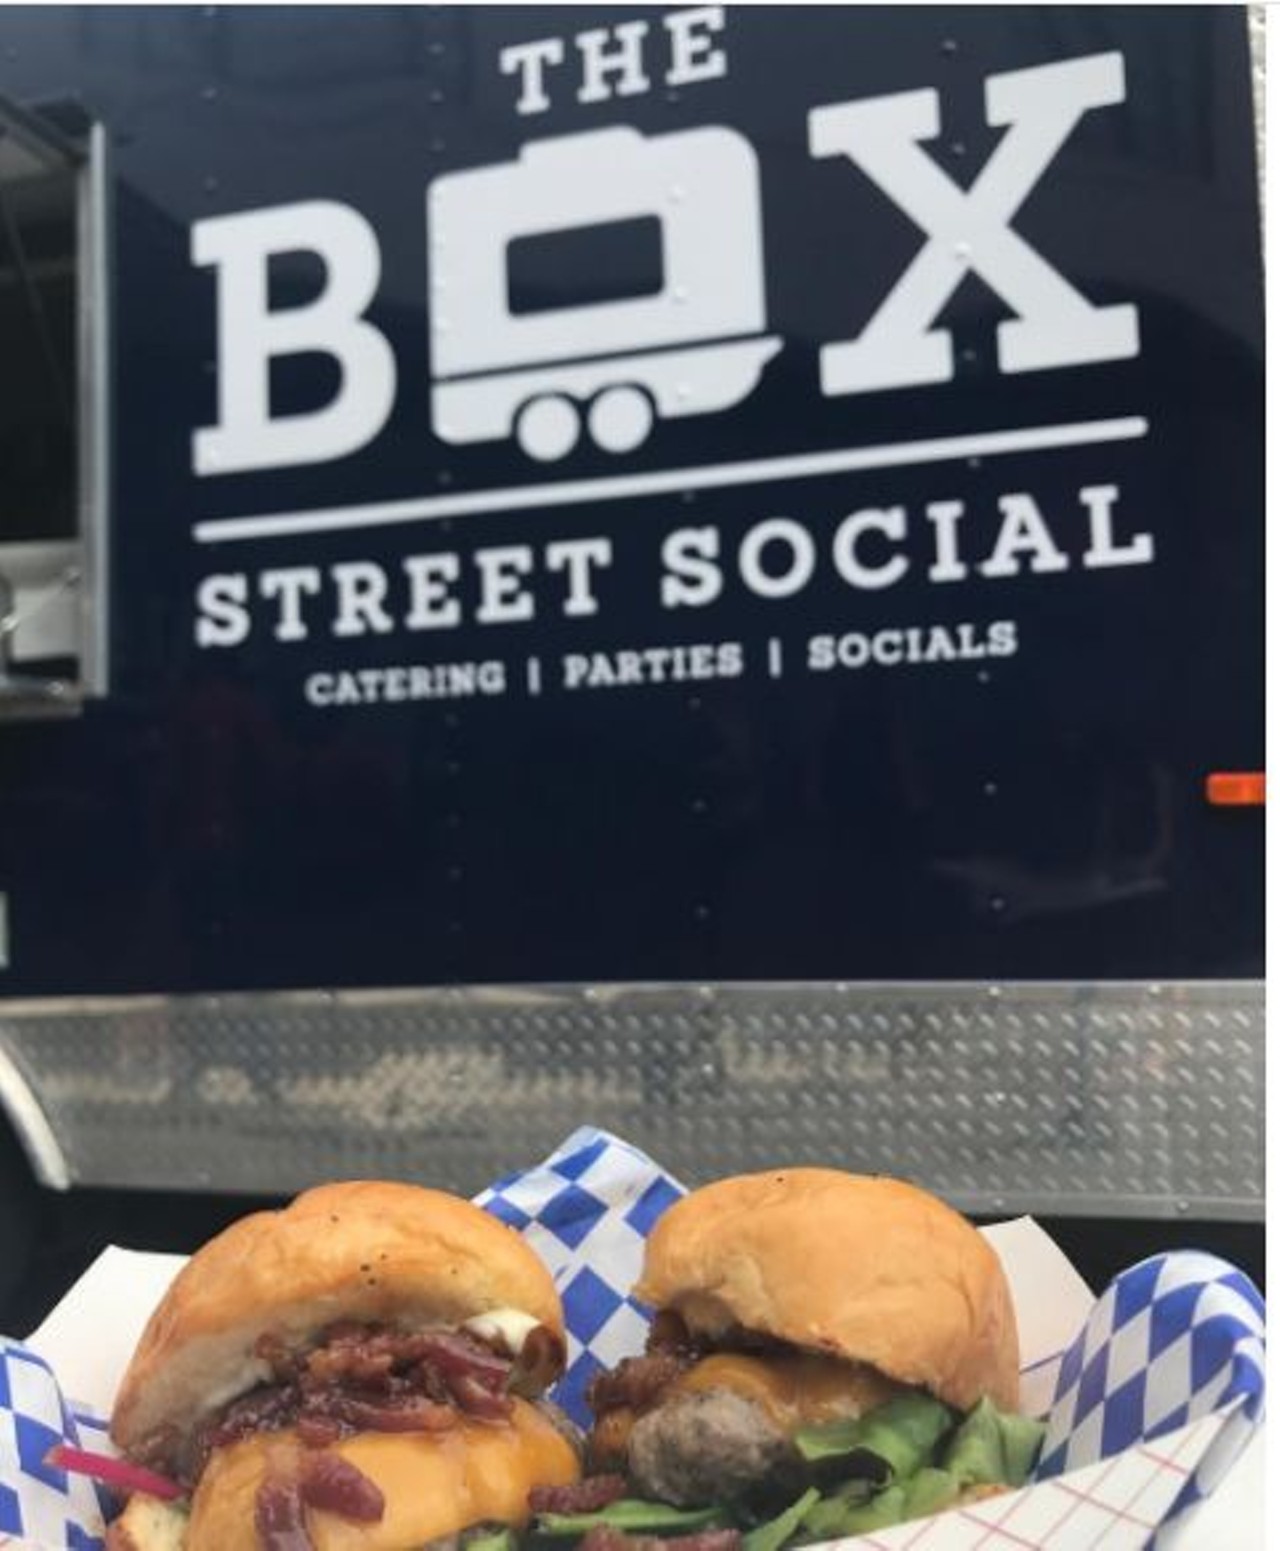 The Box Street Social
(210) 920-1602,
www.theboxstreetsocial.com
Chow down on some tasty burgers at the popular Box Street Social. 
Photo via Instagram 
theboxstreetsocial
